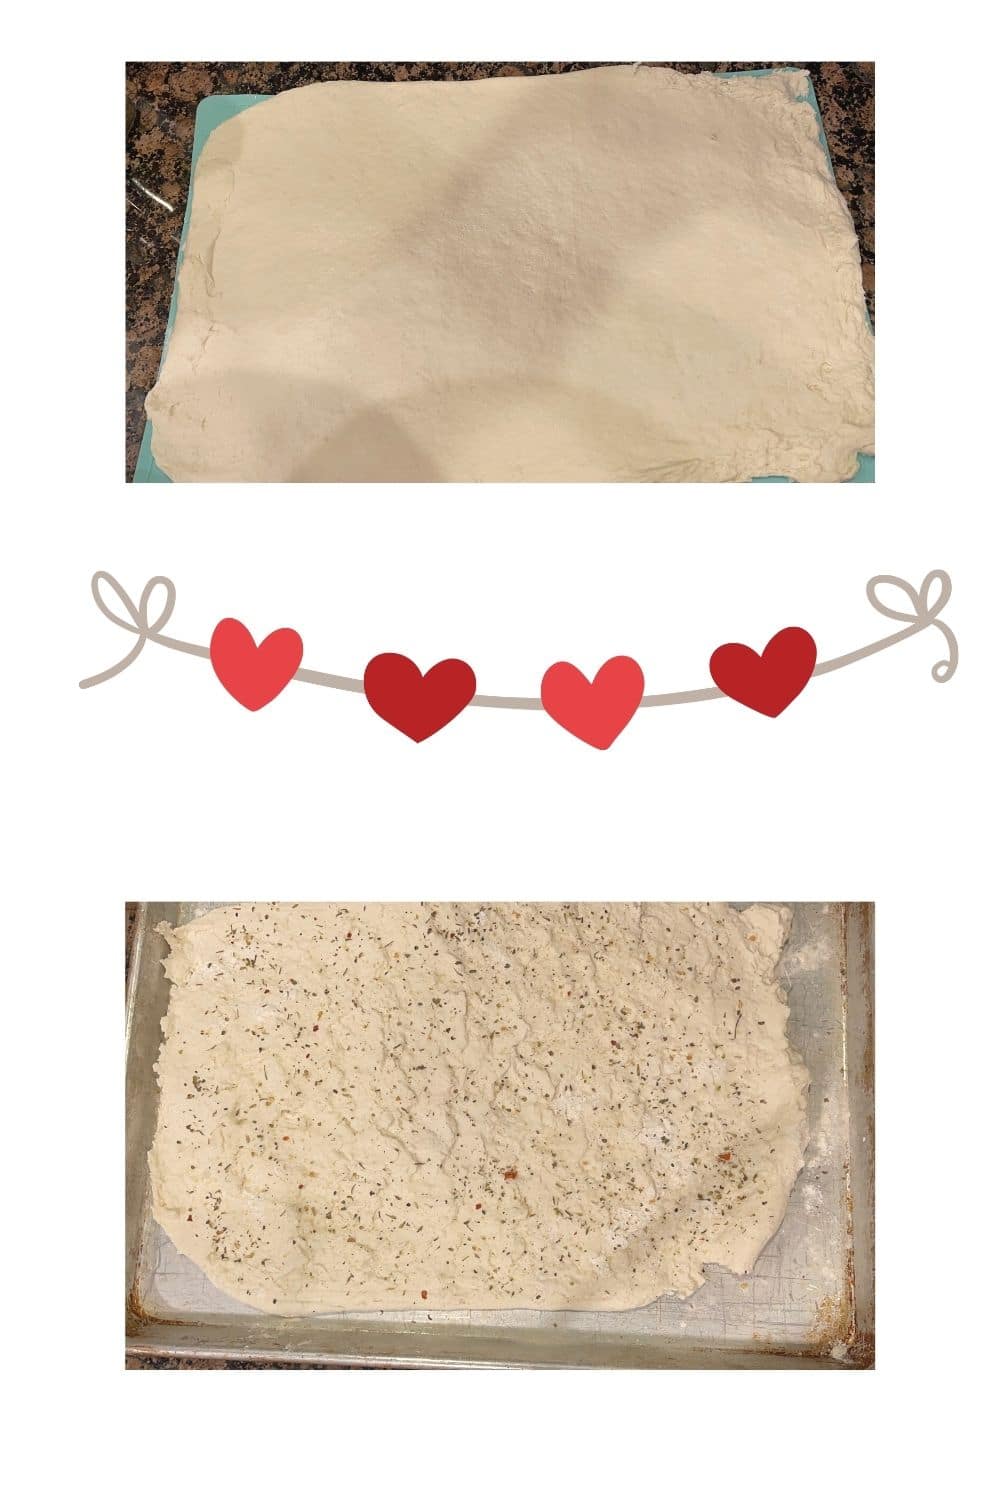 How to say I love you with pizza the dough